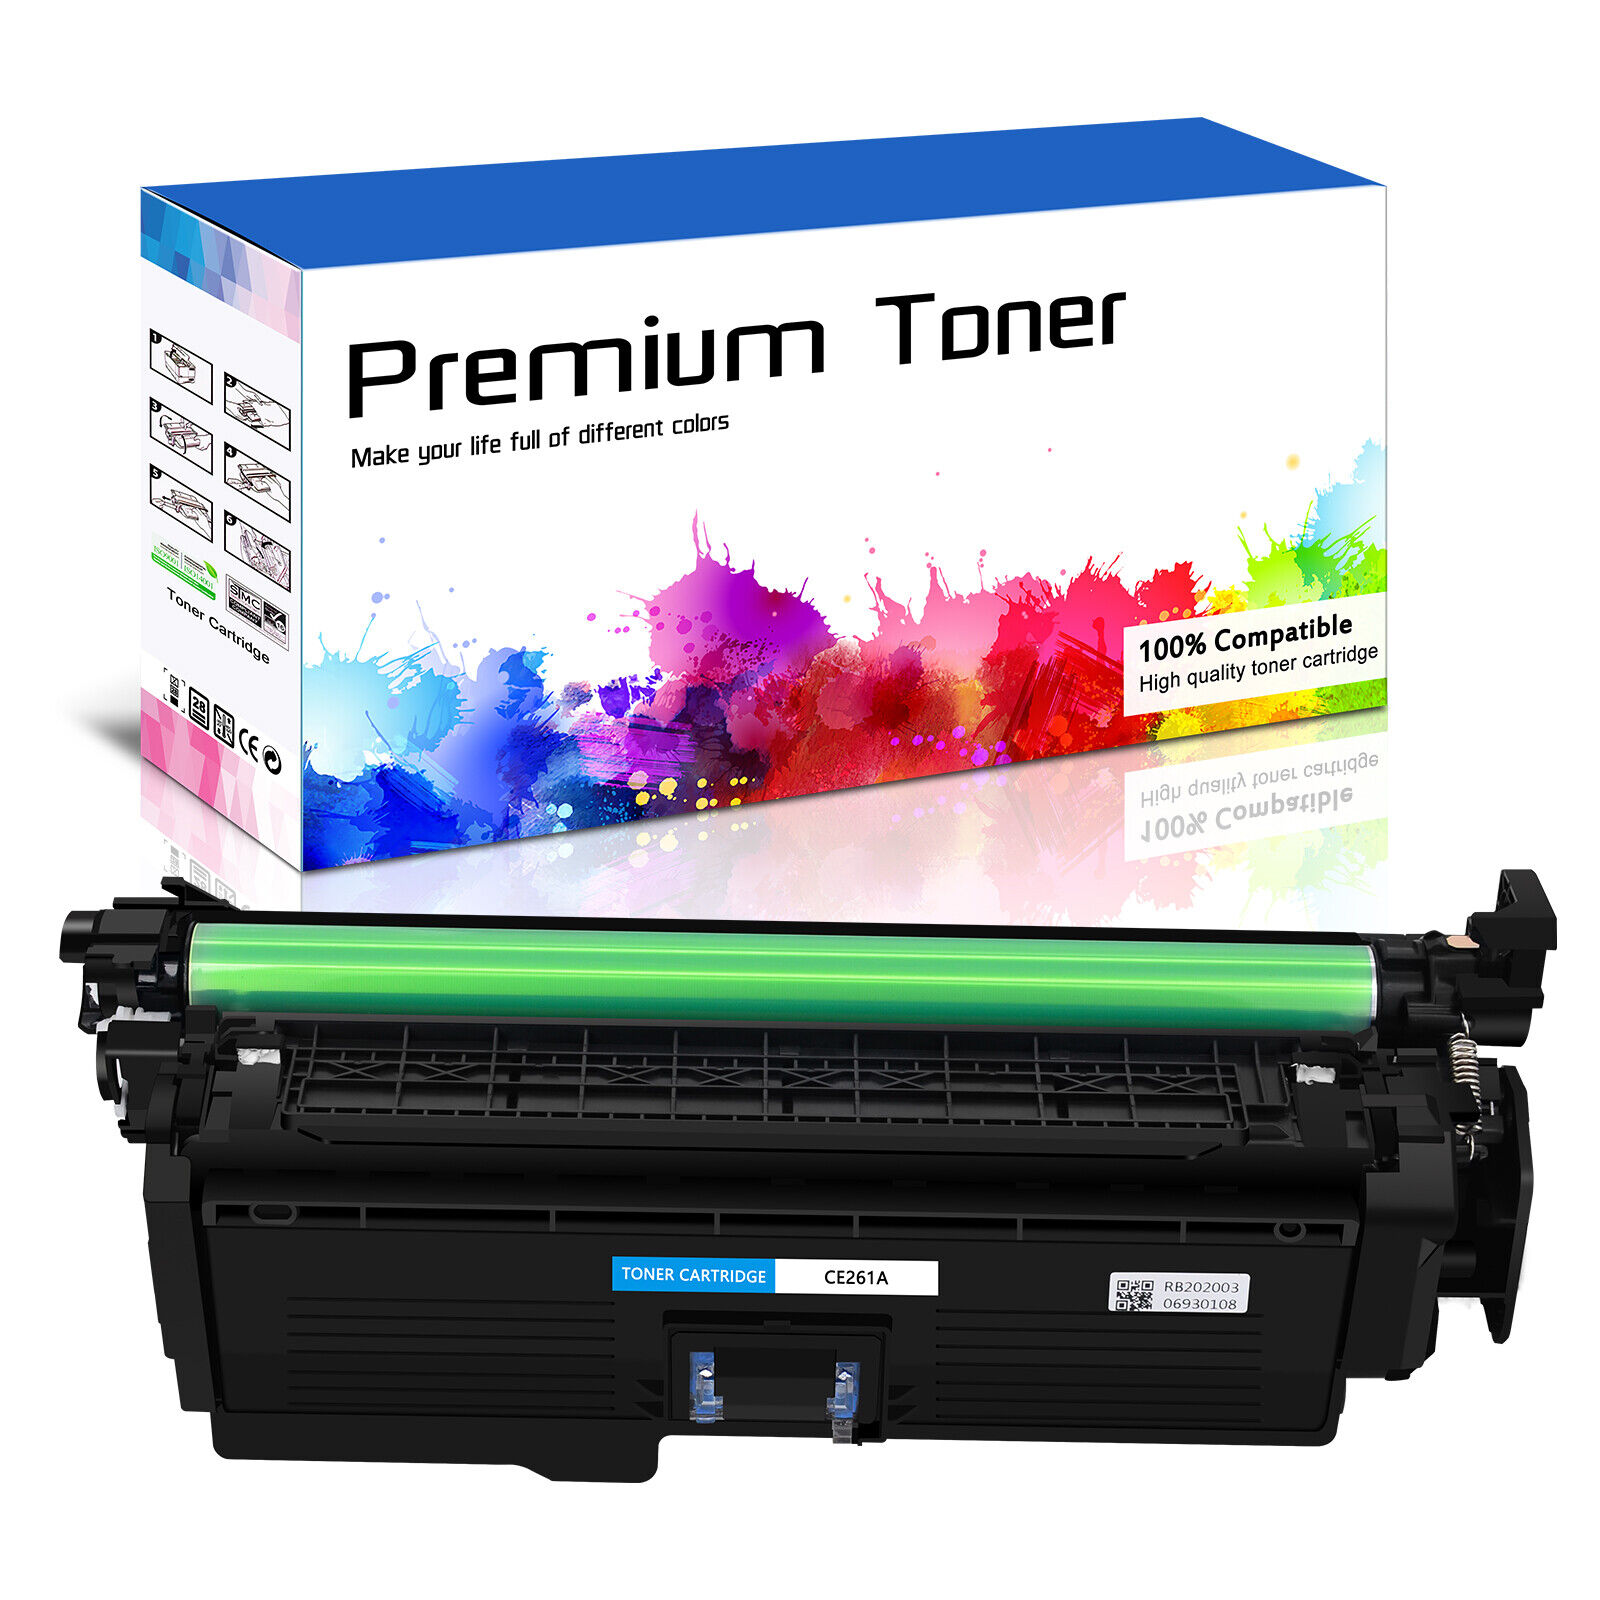 1PK Cyan CE261A 647A Toner for HP Color LaserJet CP4520 CP4025 CP4025N